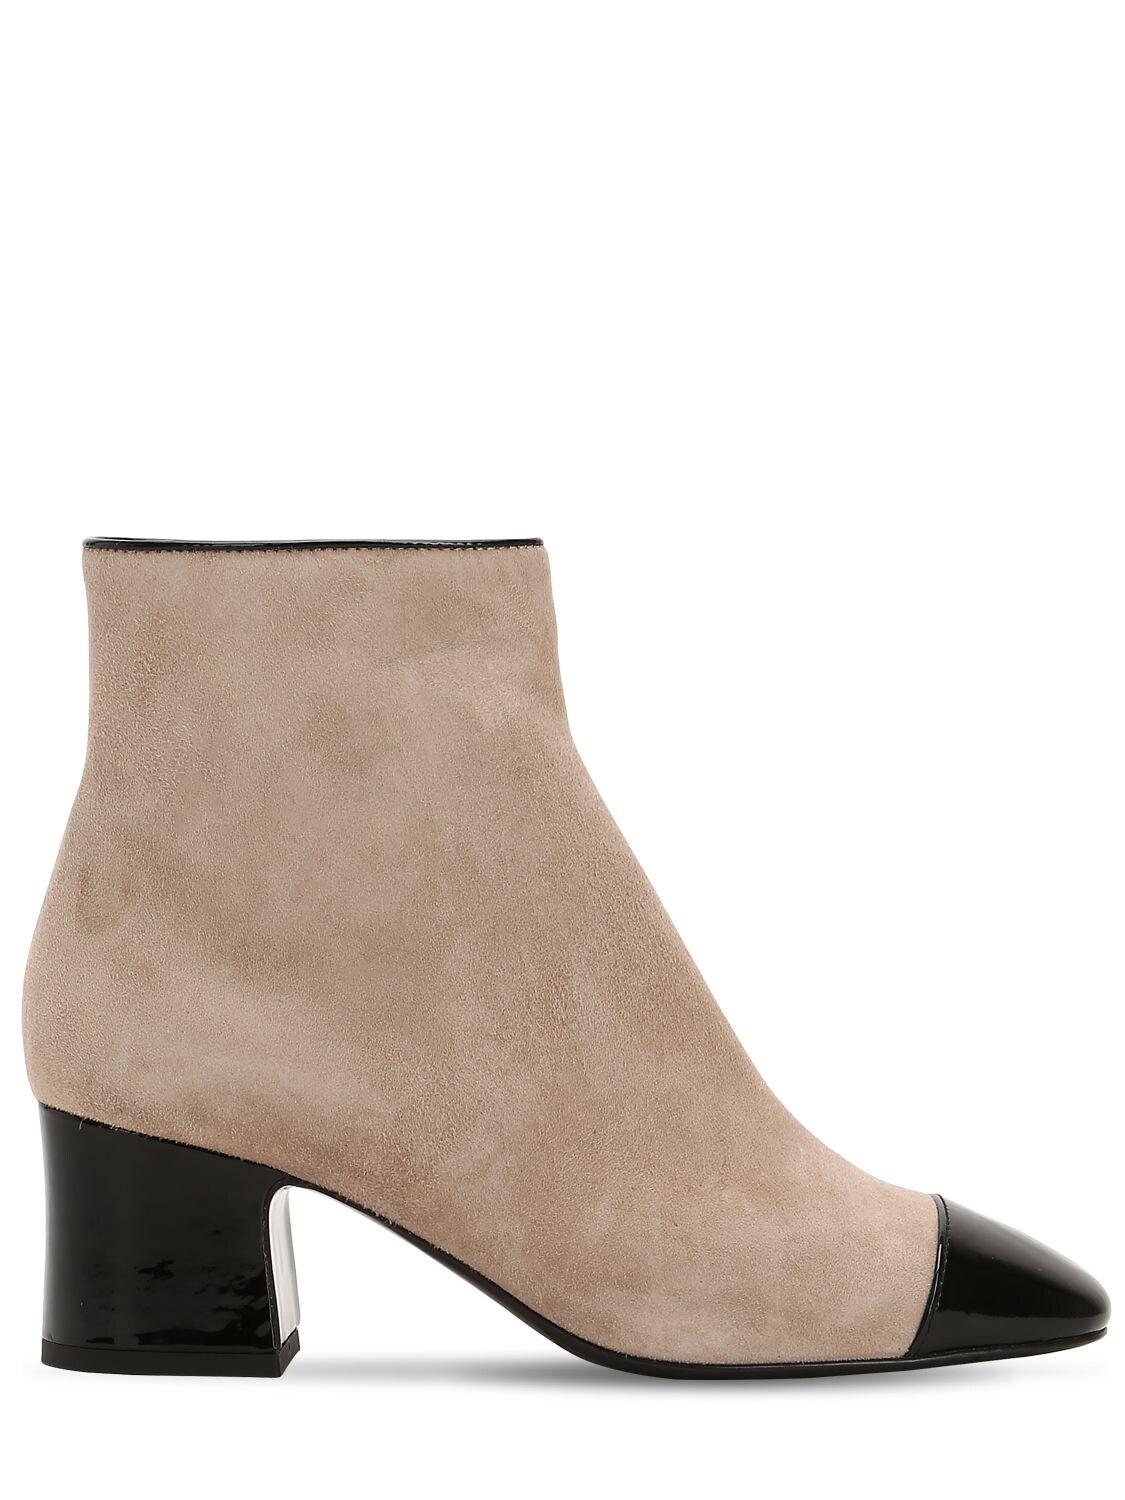 Aand 60mm Suede & Patent Leather Ankle Boots In Beige,black